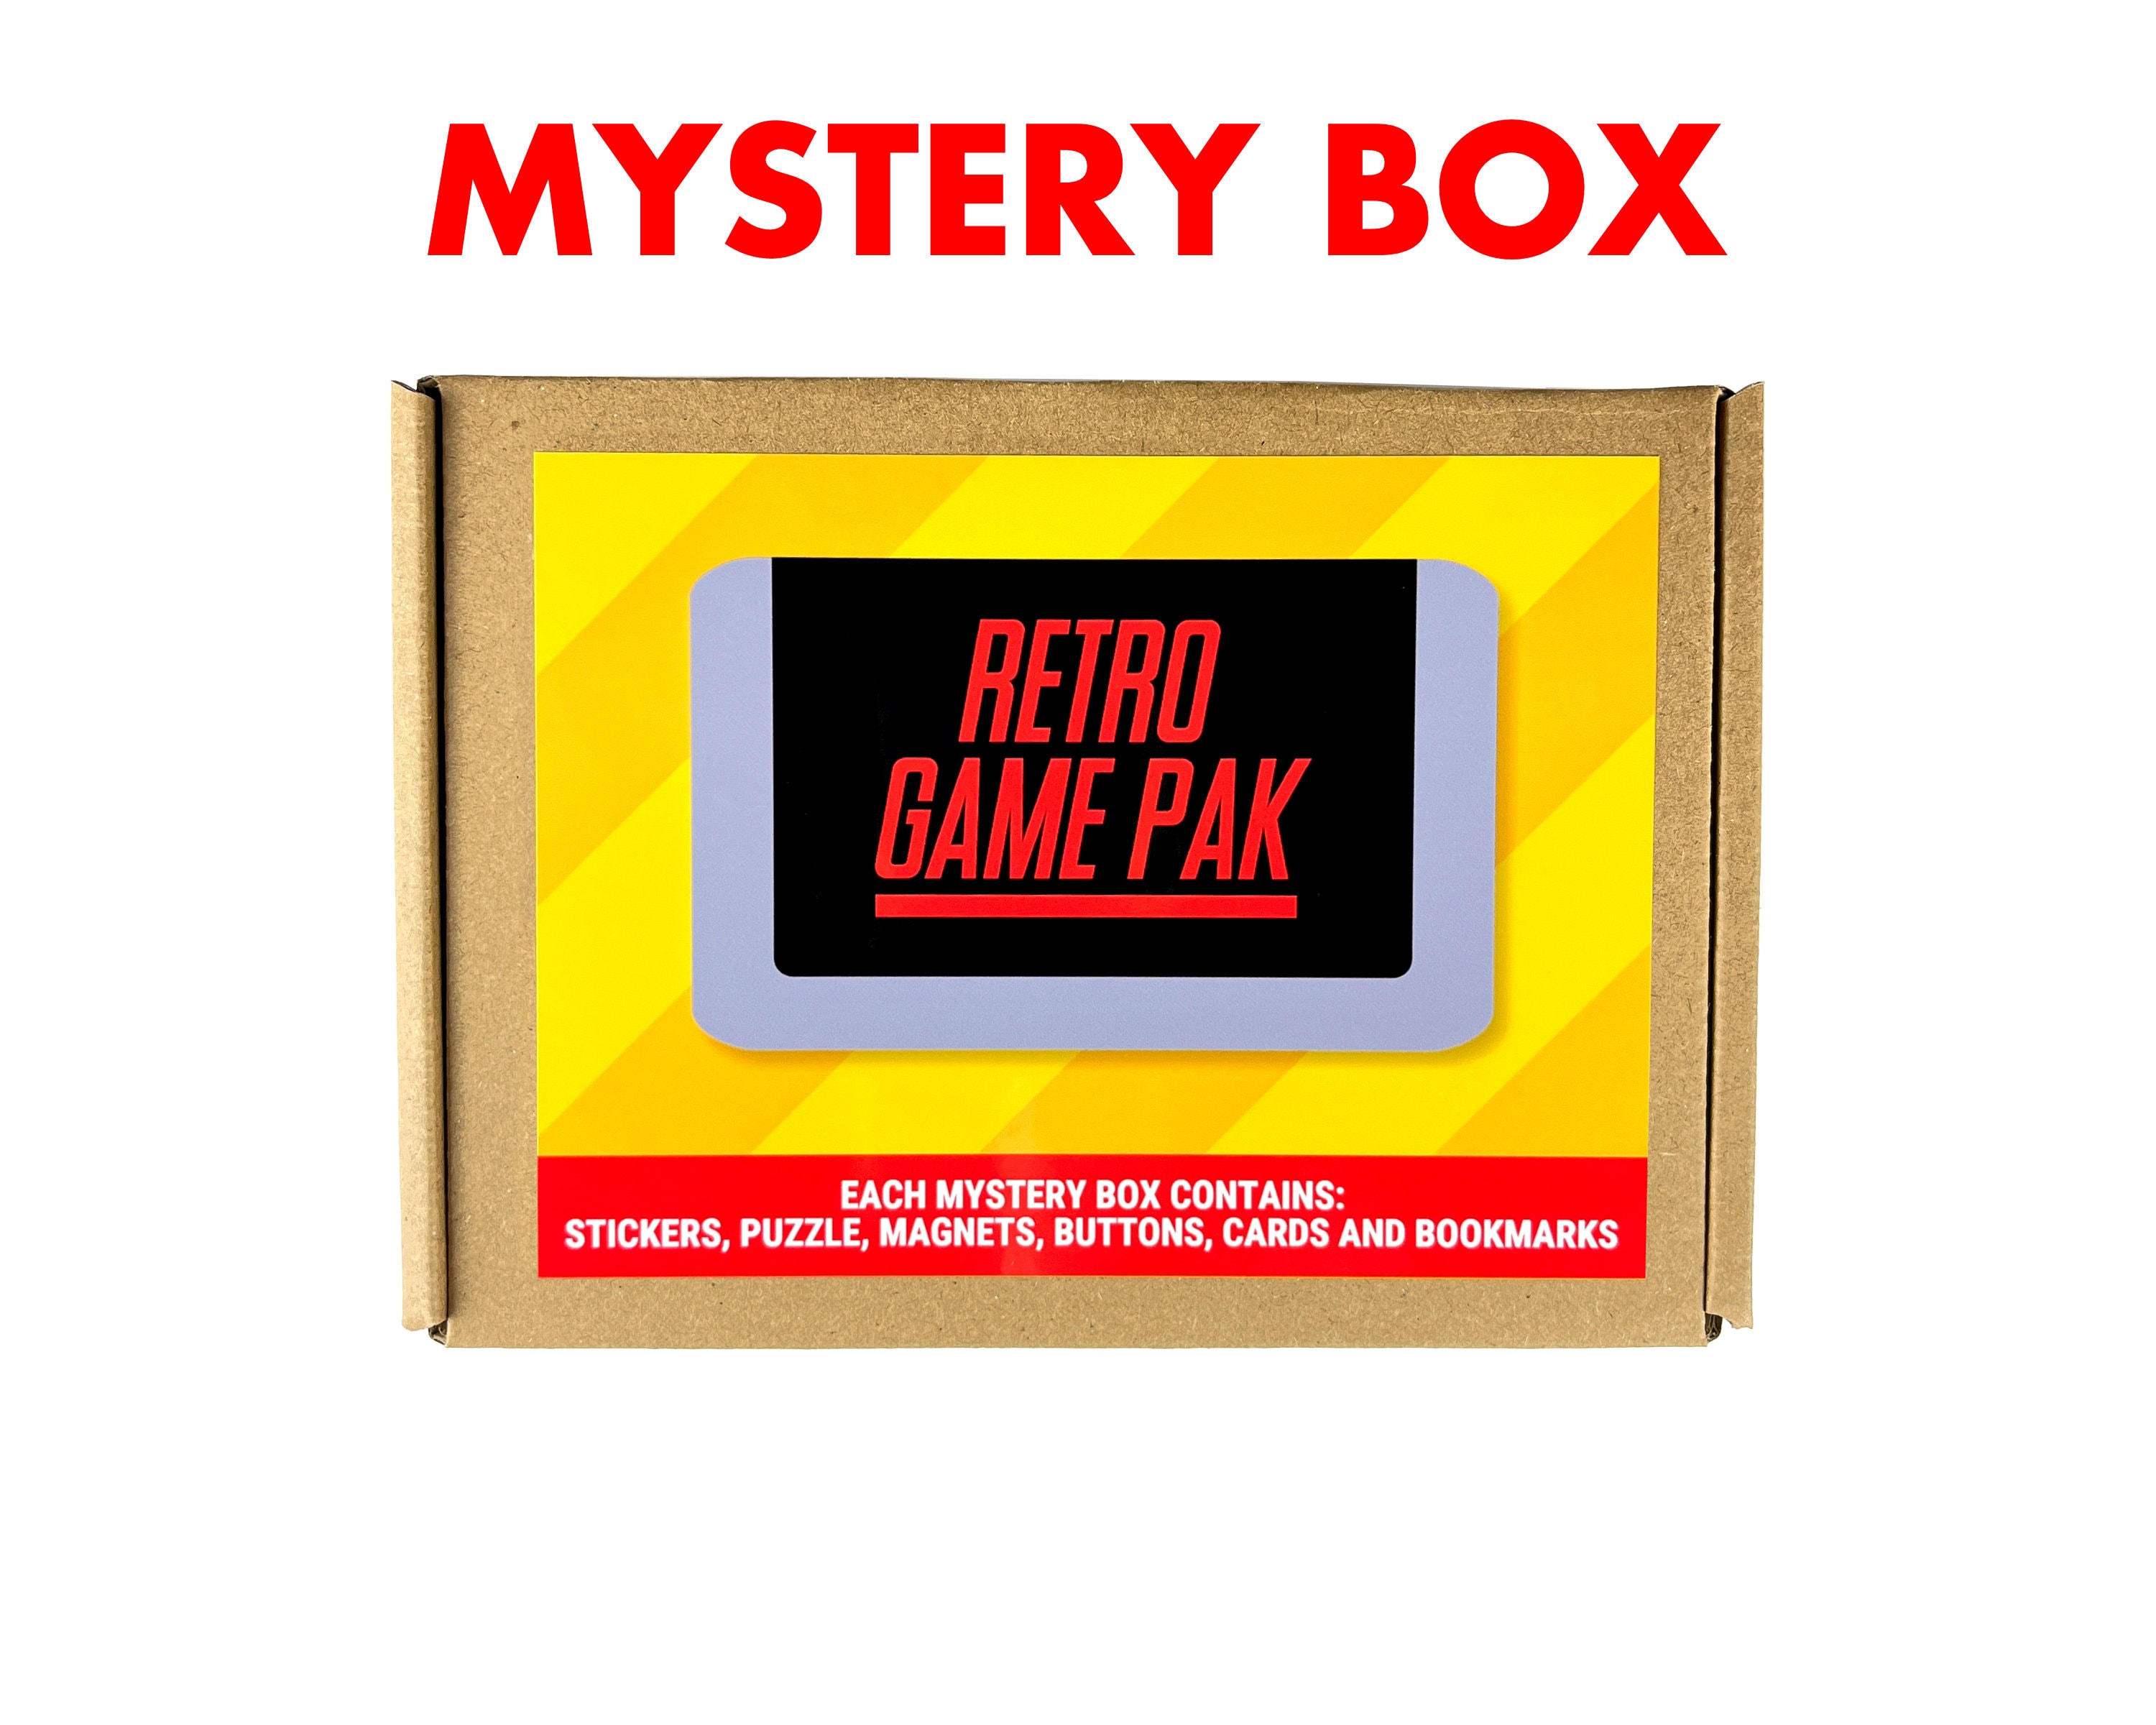 Retro Game Pak Mystery Box Video Game Stickers Puzzles Magnets Buttons  Cards Bookmarks